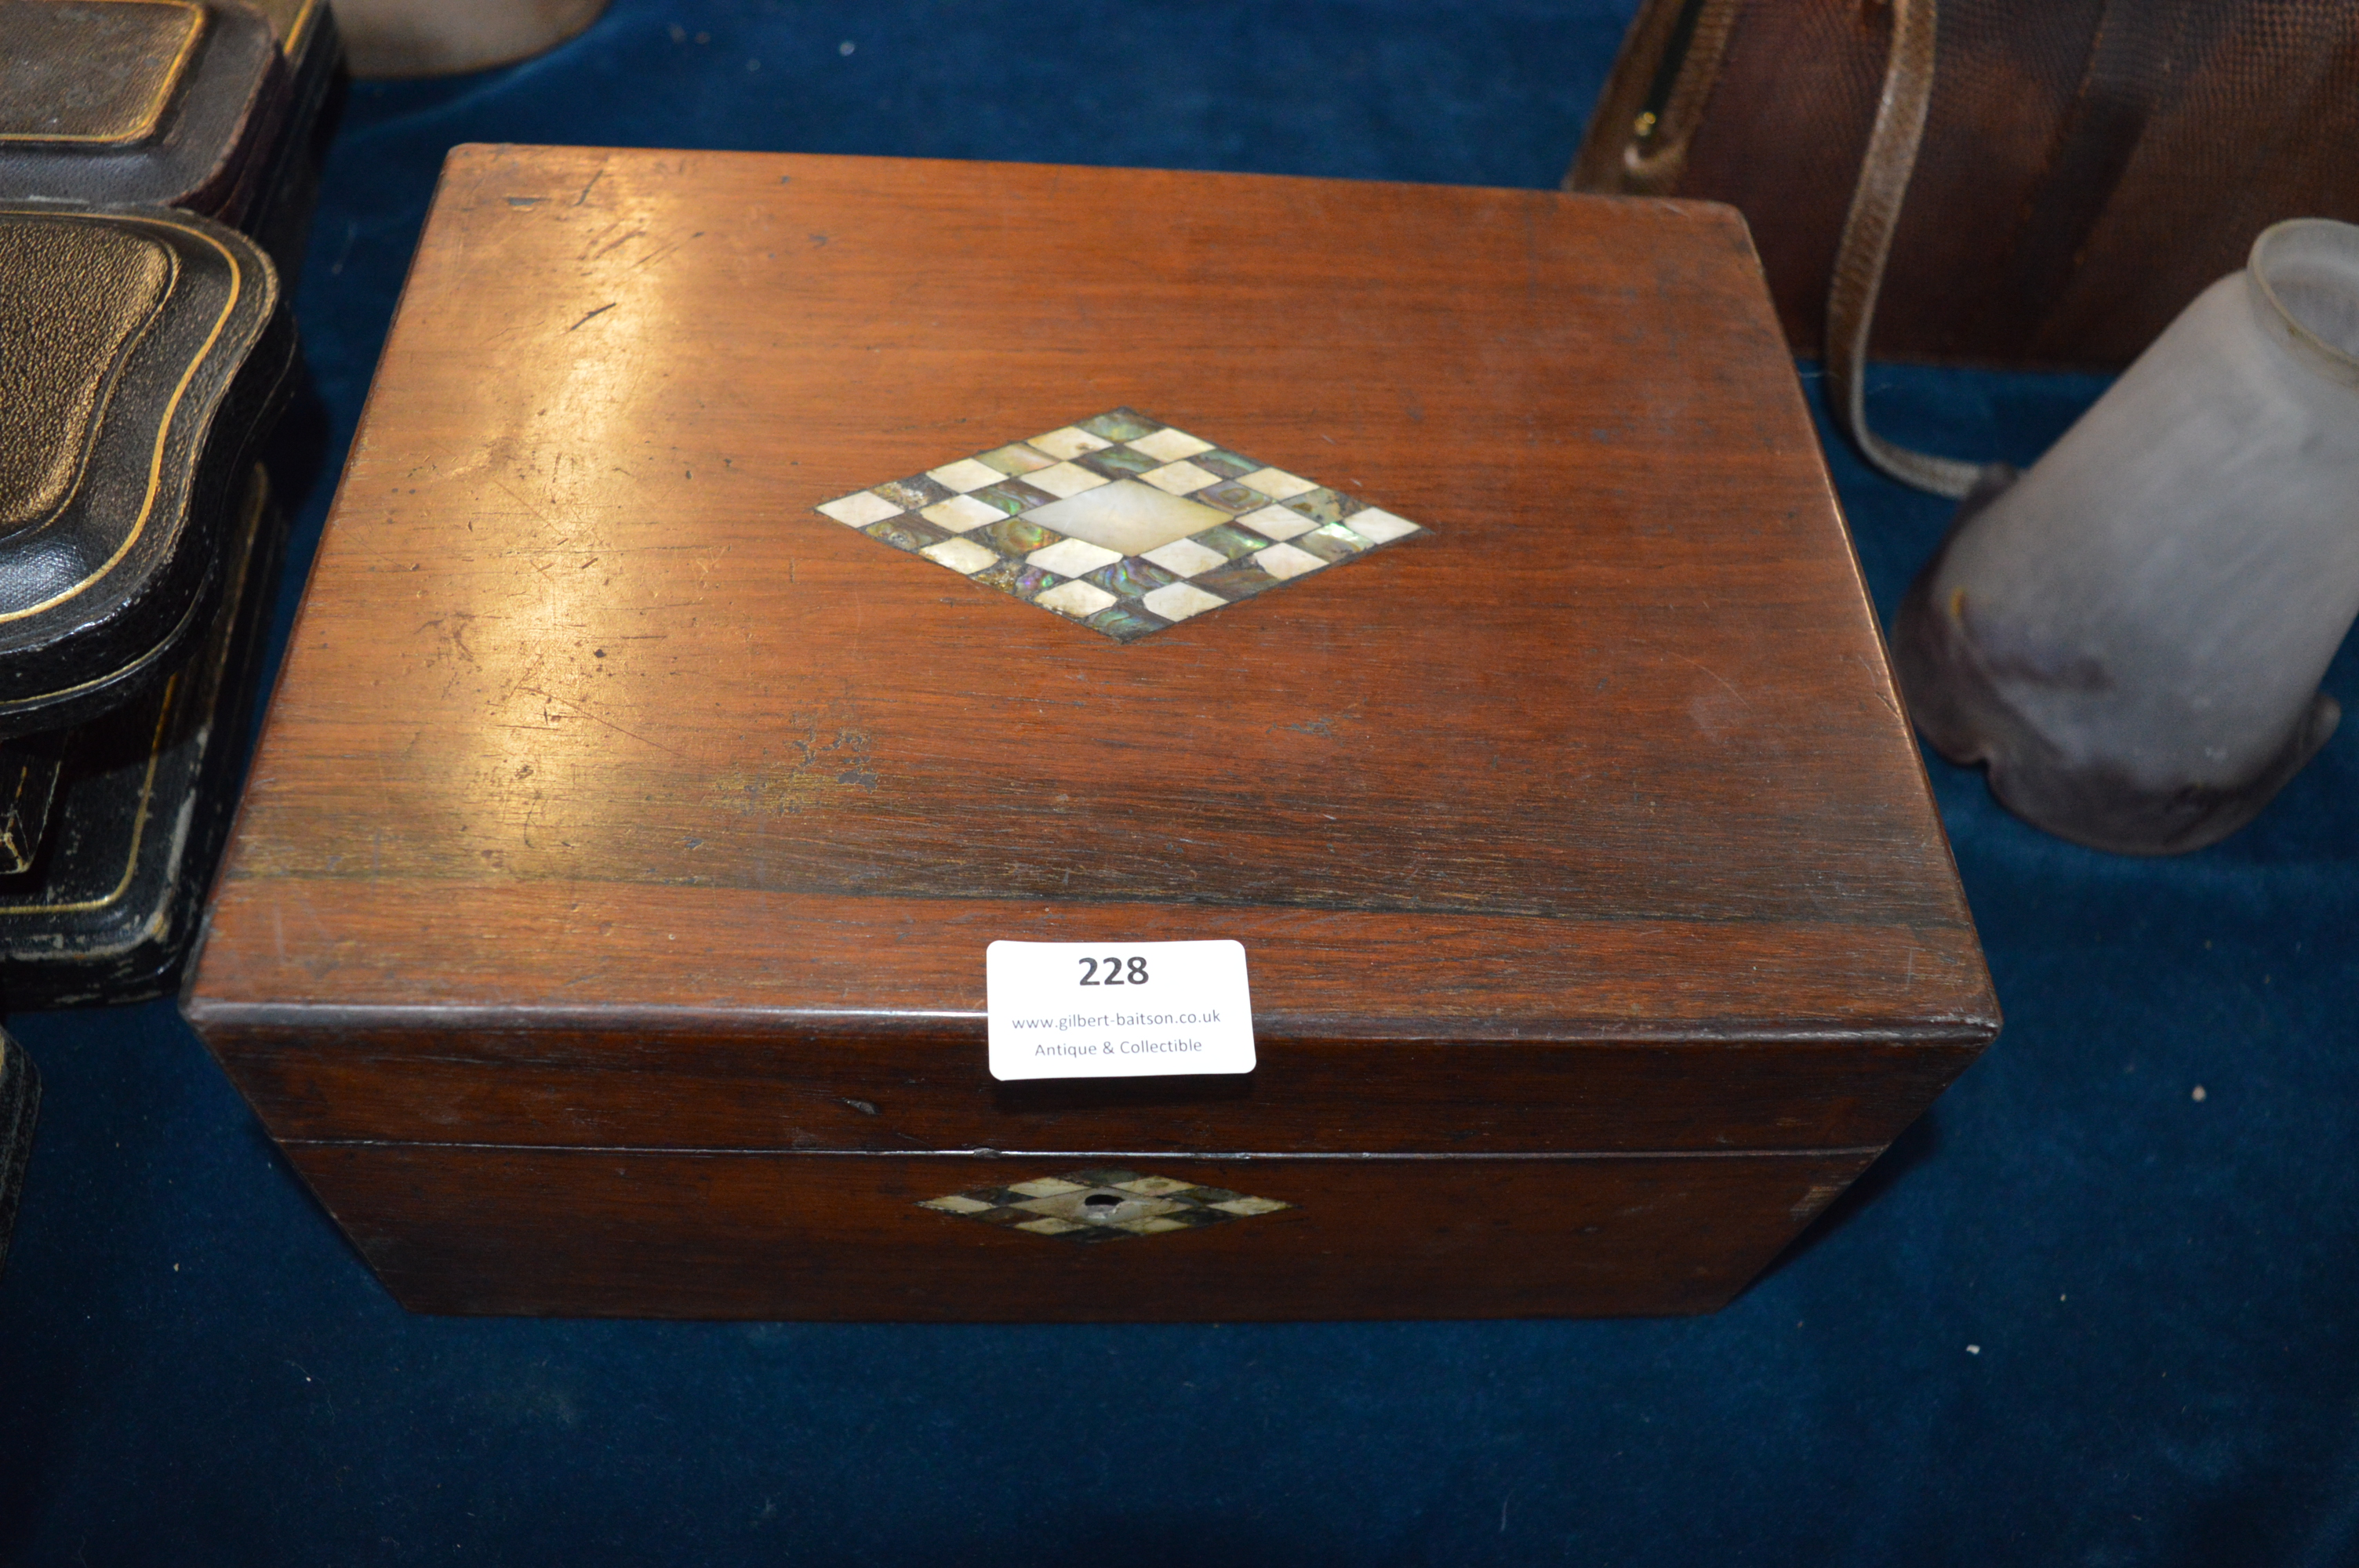 Distressed Victorian Mahogany Workbox with Mother of Pearl Inlay and Contents - Image 2 of 2